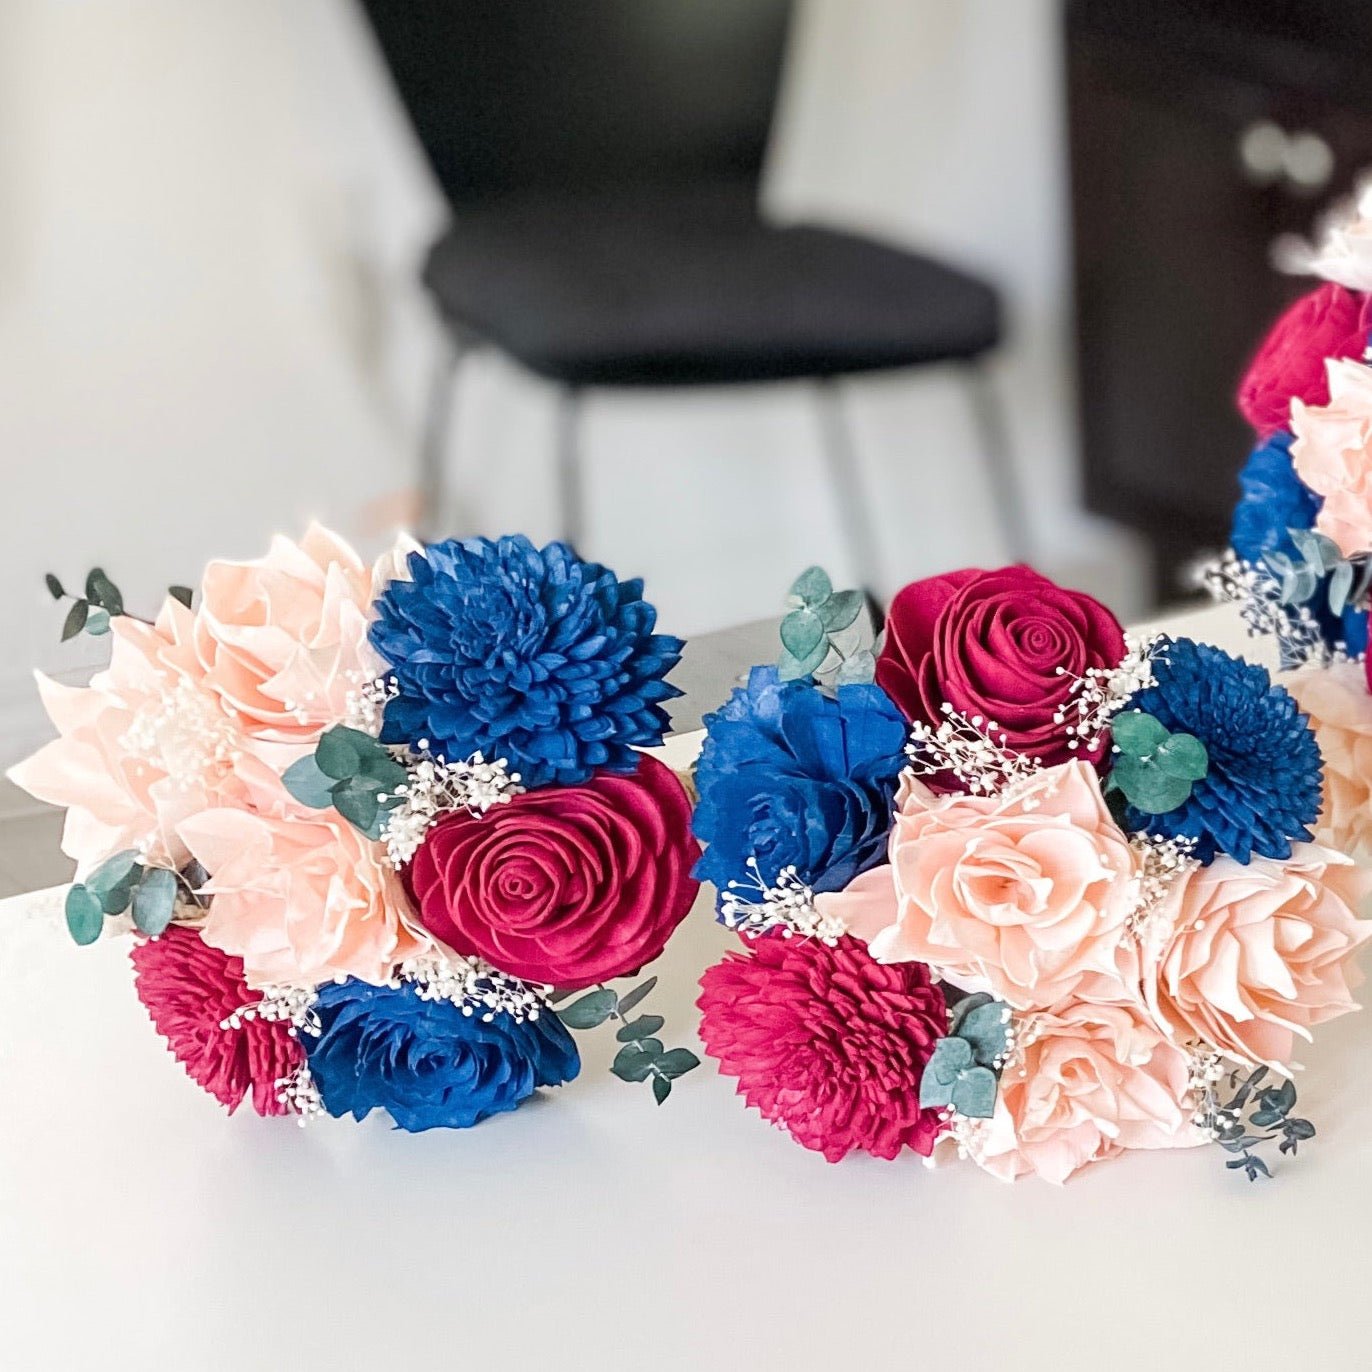 Blissful Union, A Bouquet of Navy Blue and Pink Roses For the Bride's Special Day - PapiroExtra Large 12" Bride